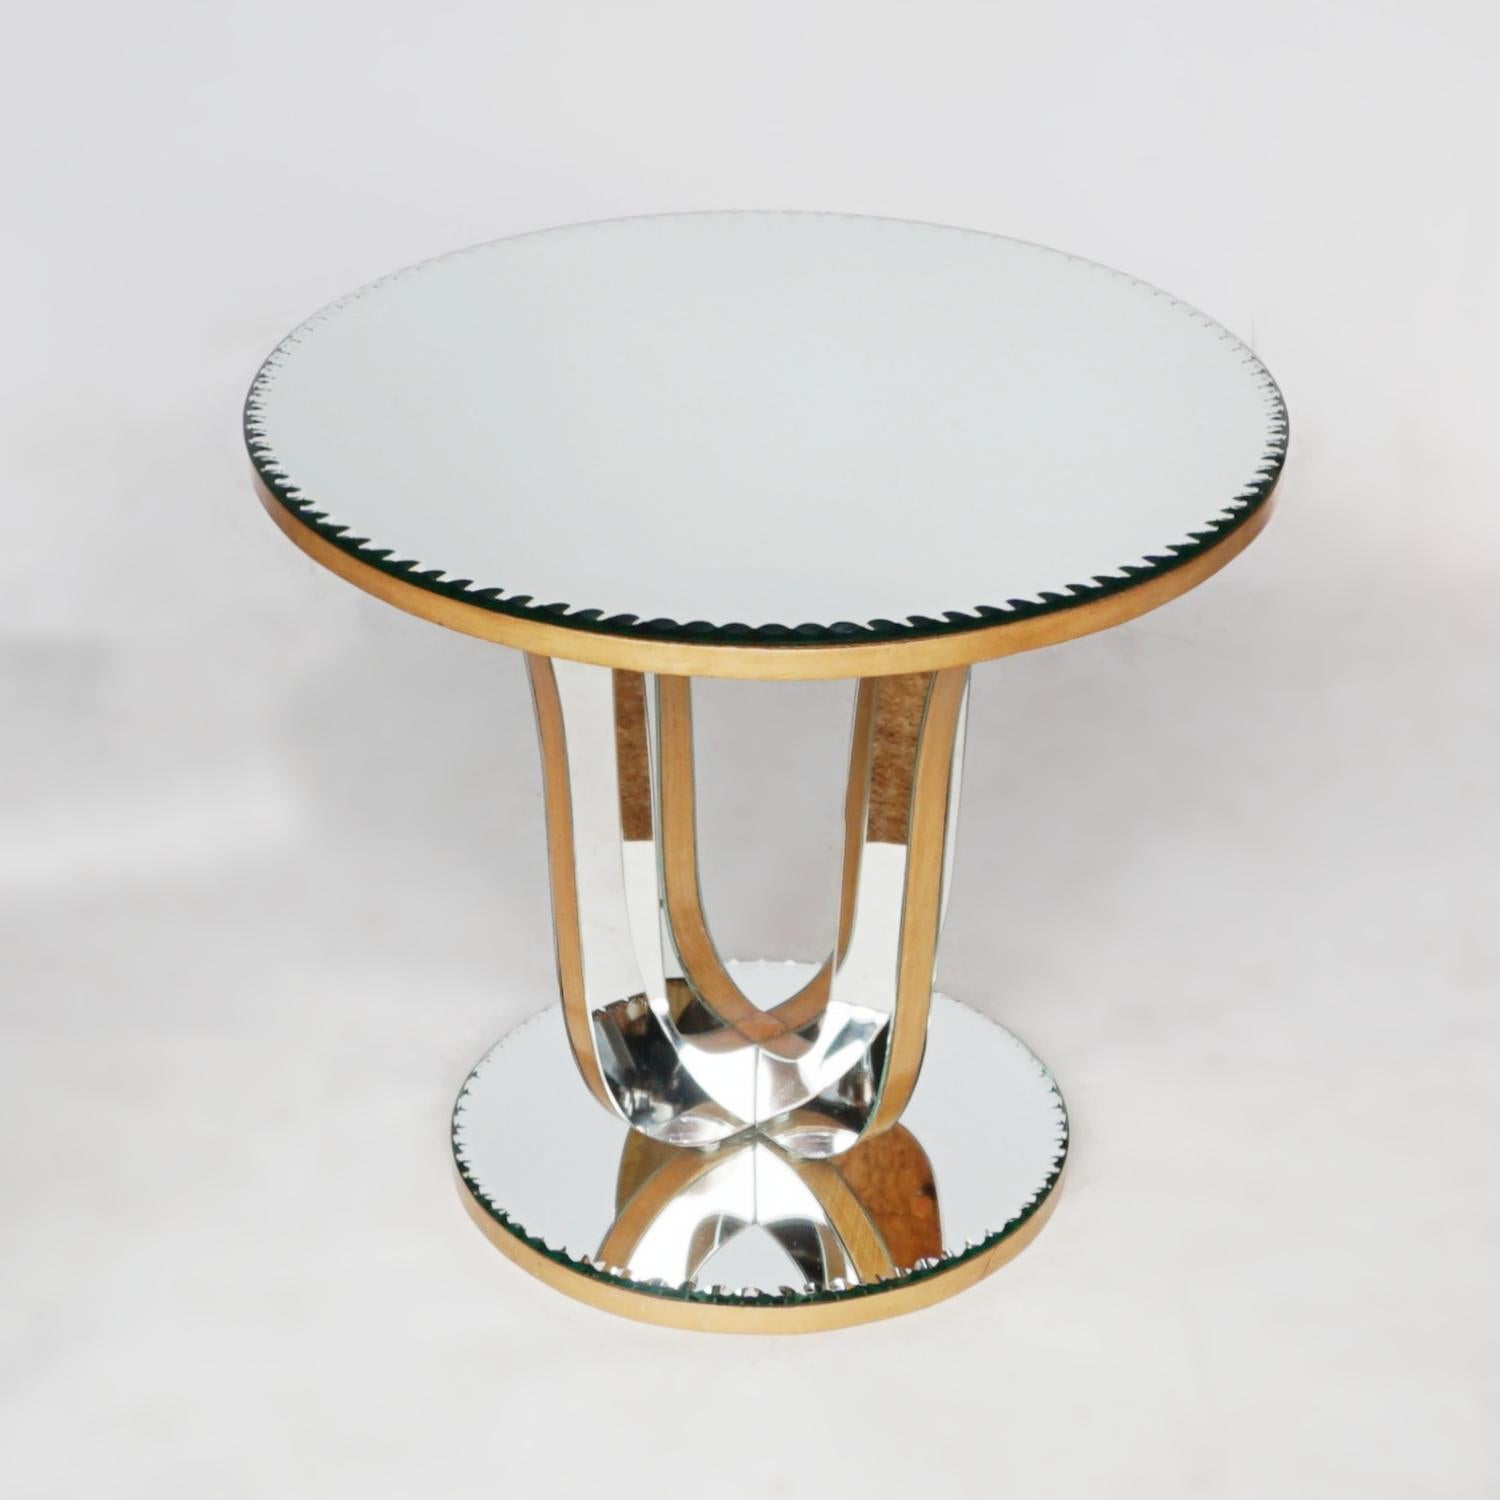 A Mid-Century mirrored glass side table. Bevelled trim around the base and the table top. 

Dimensions: H 51cm, W 59cm, D 59cm 

Origin: English

Date: Circa 1950

Item number: 2405212

All of our furniture is extensively polished and